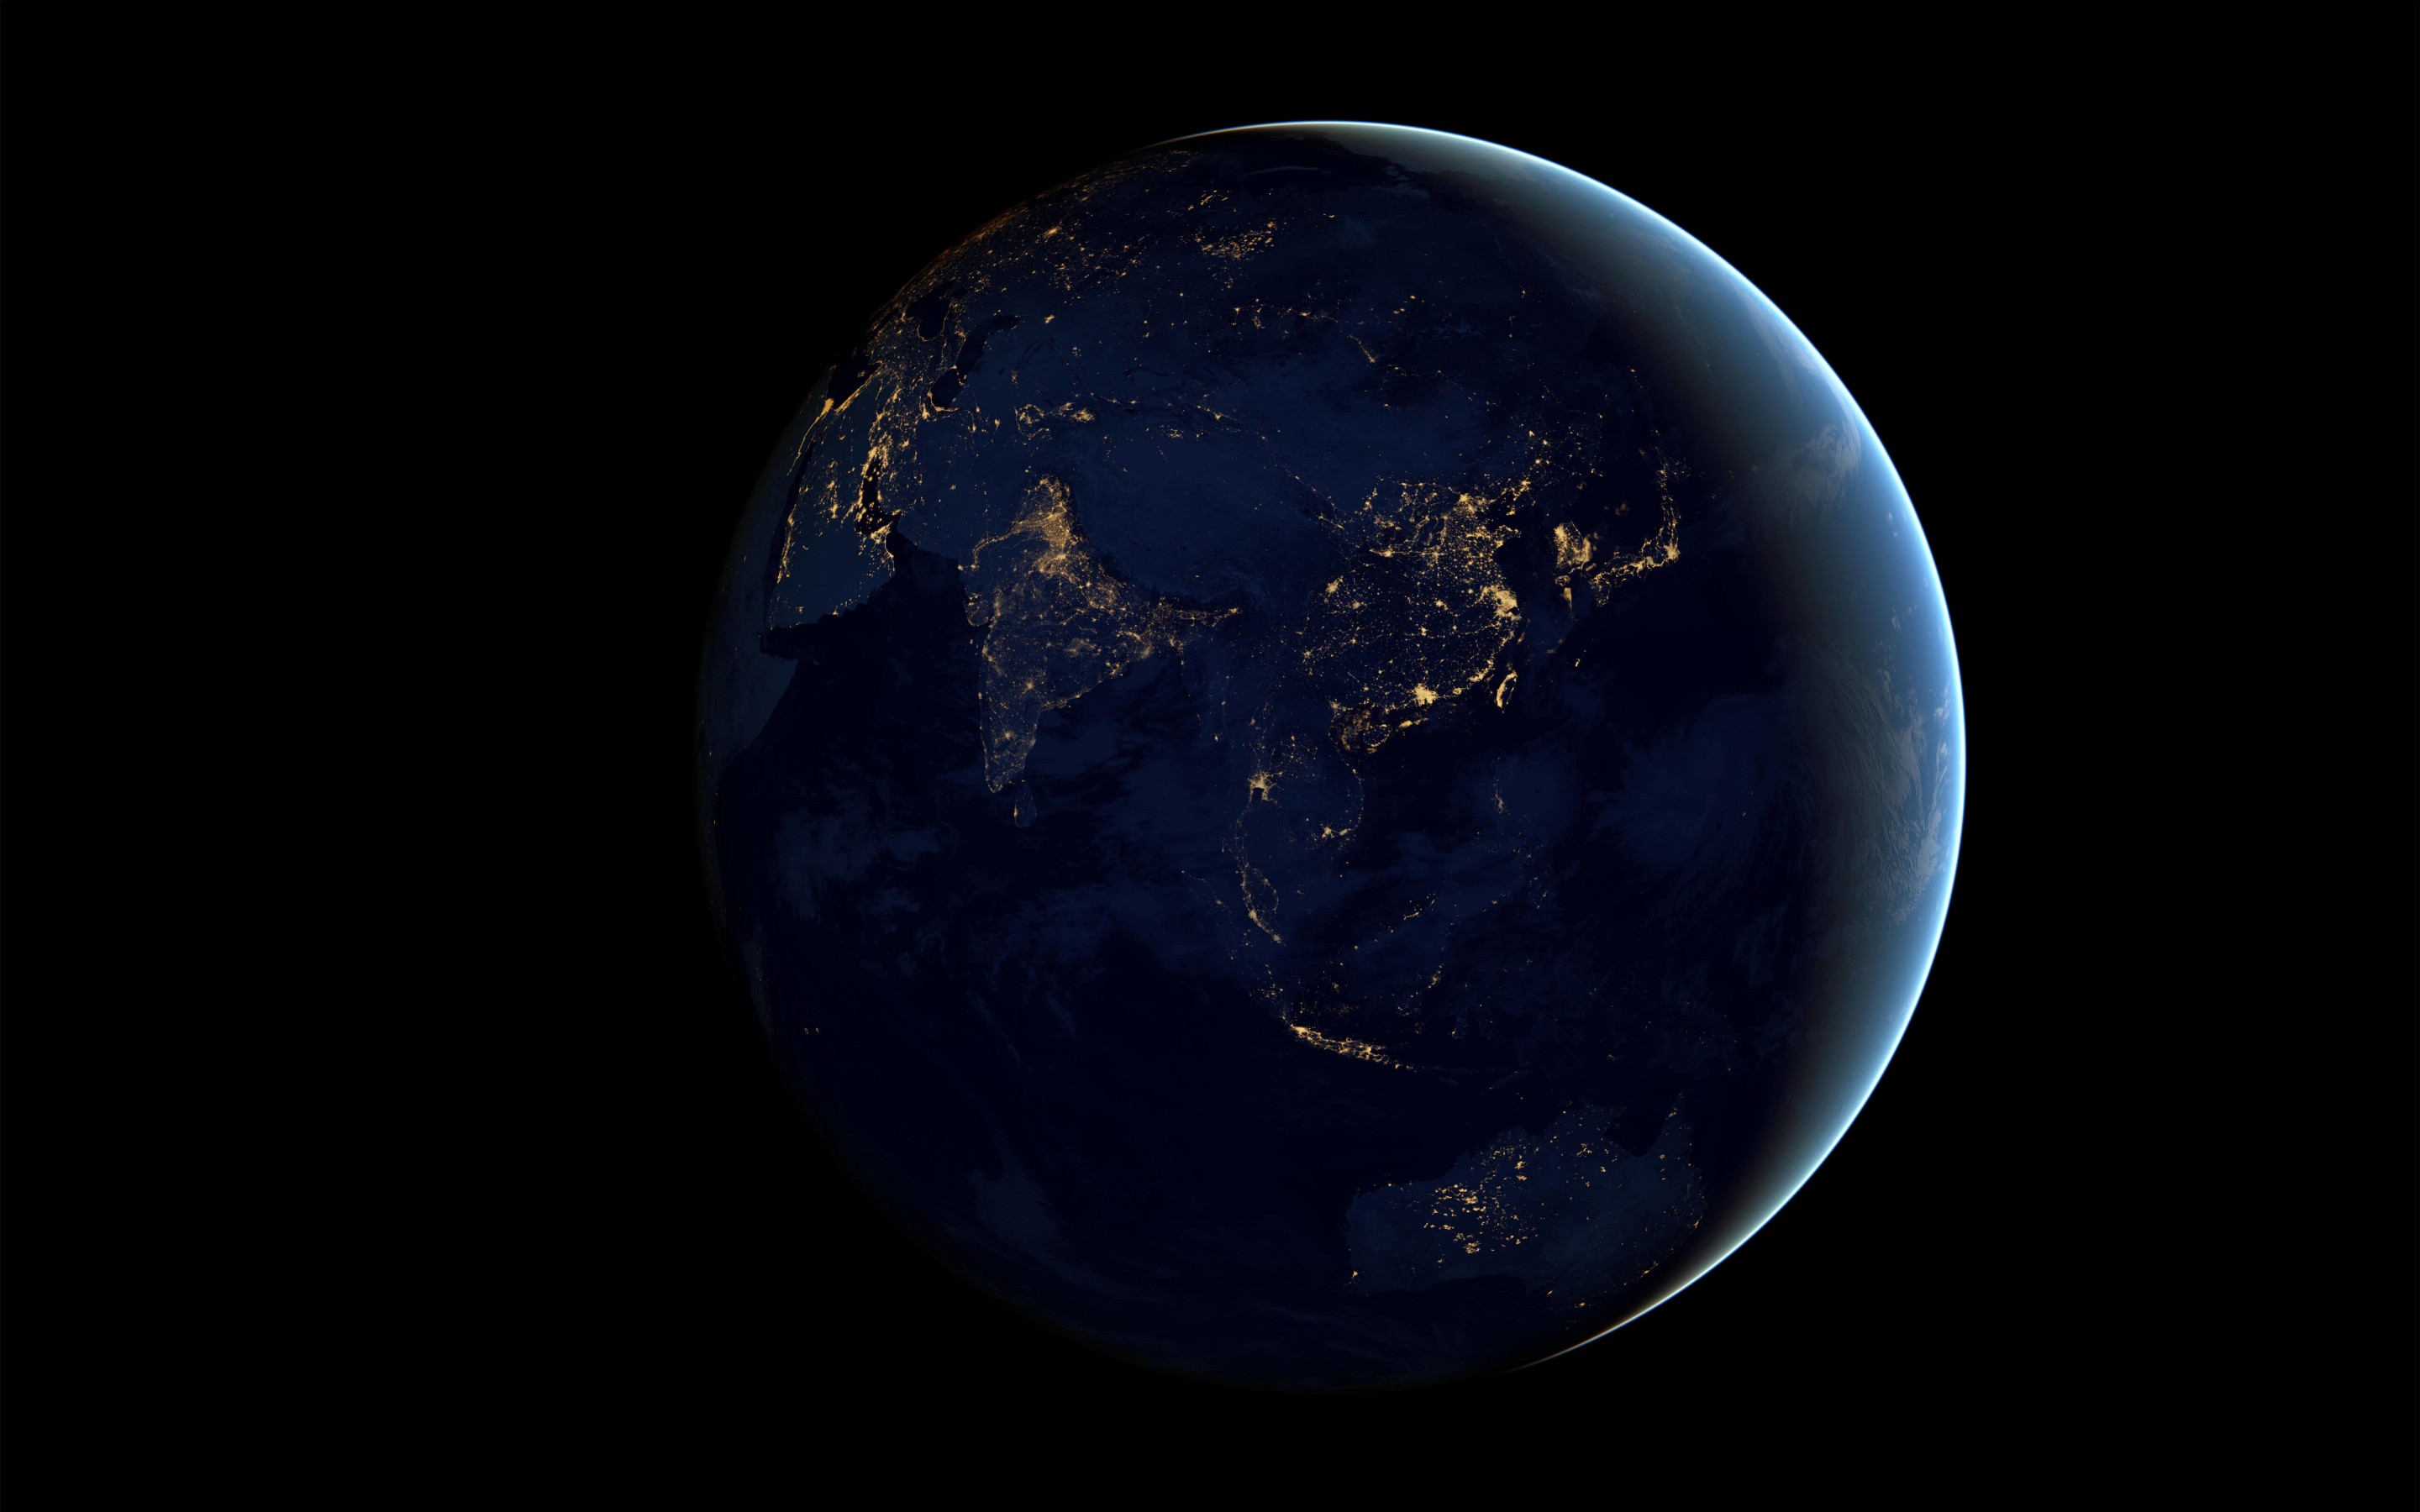 Earth At Night Seen From Space Wallpaper for Desktop 2880x1800